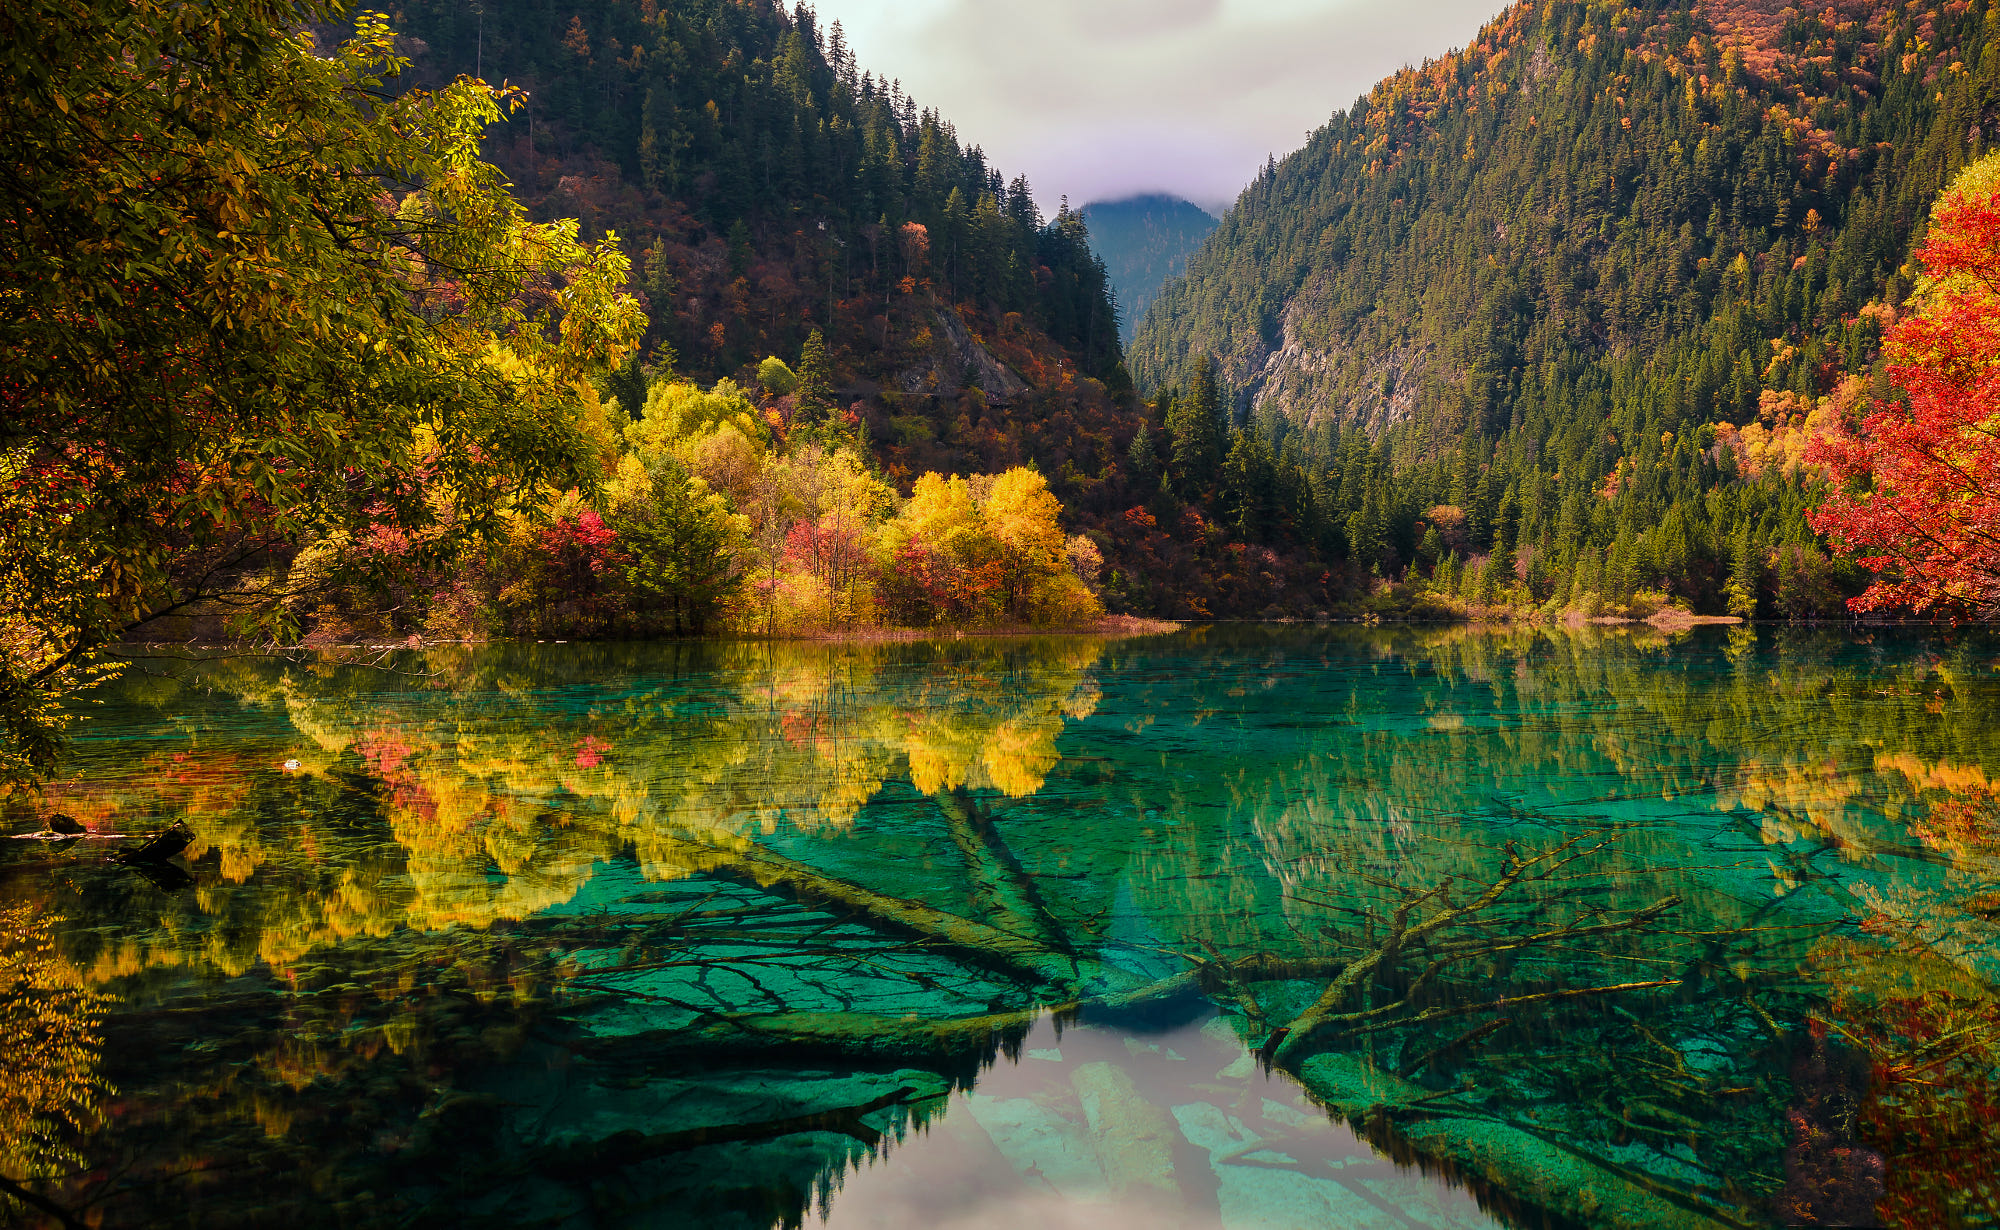 General 2000x1230 landscape colorful nature mountains trees yellow water lake reflection fall branch green